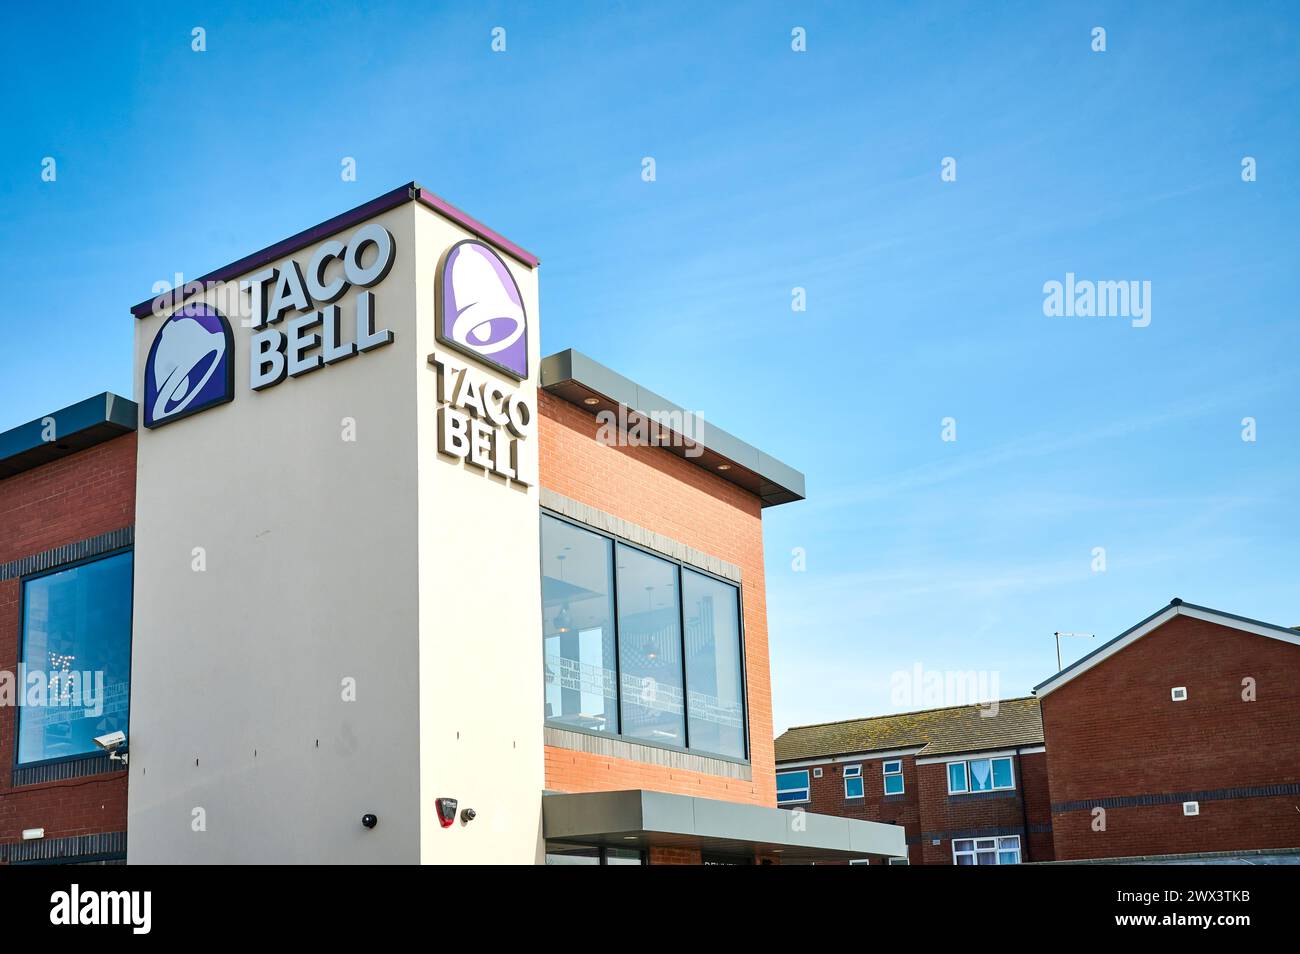 Taco Bell fast food restaurant in Blackpool Stock Photo